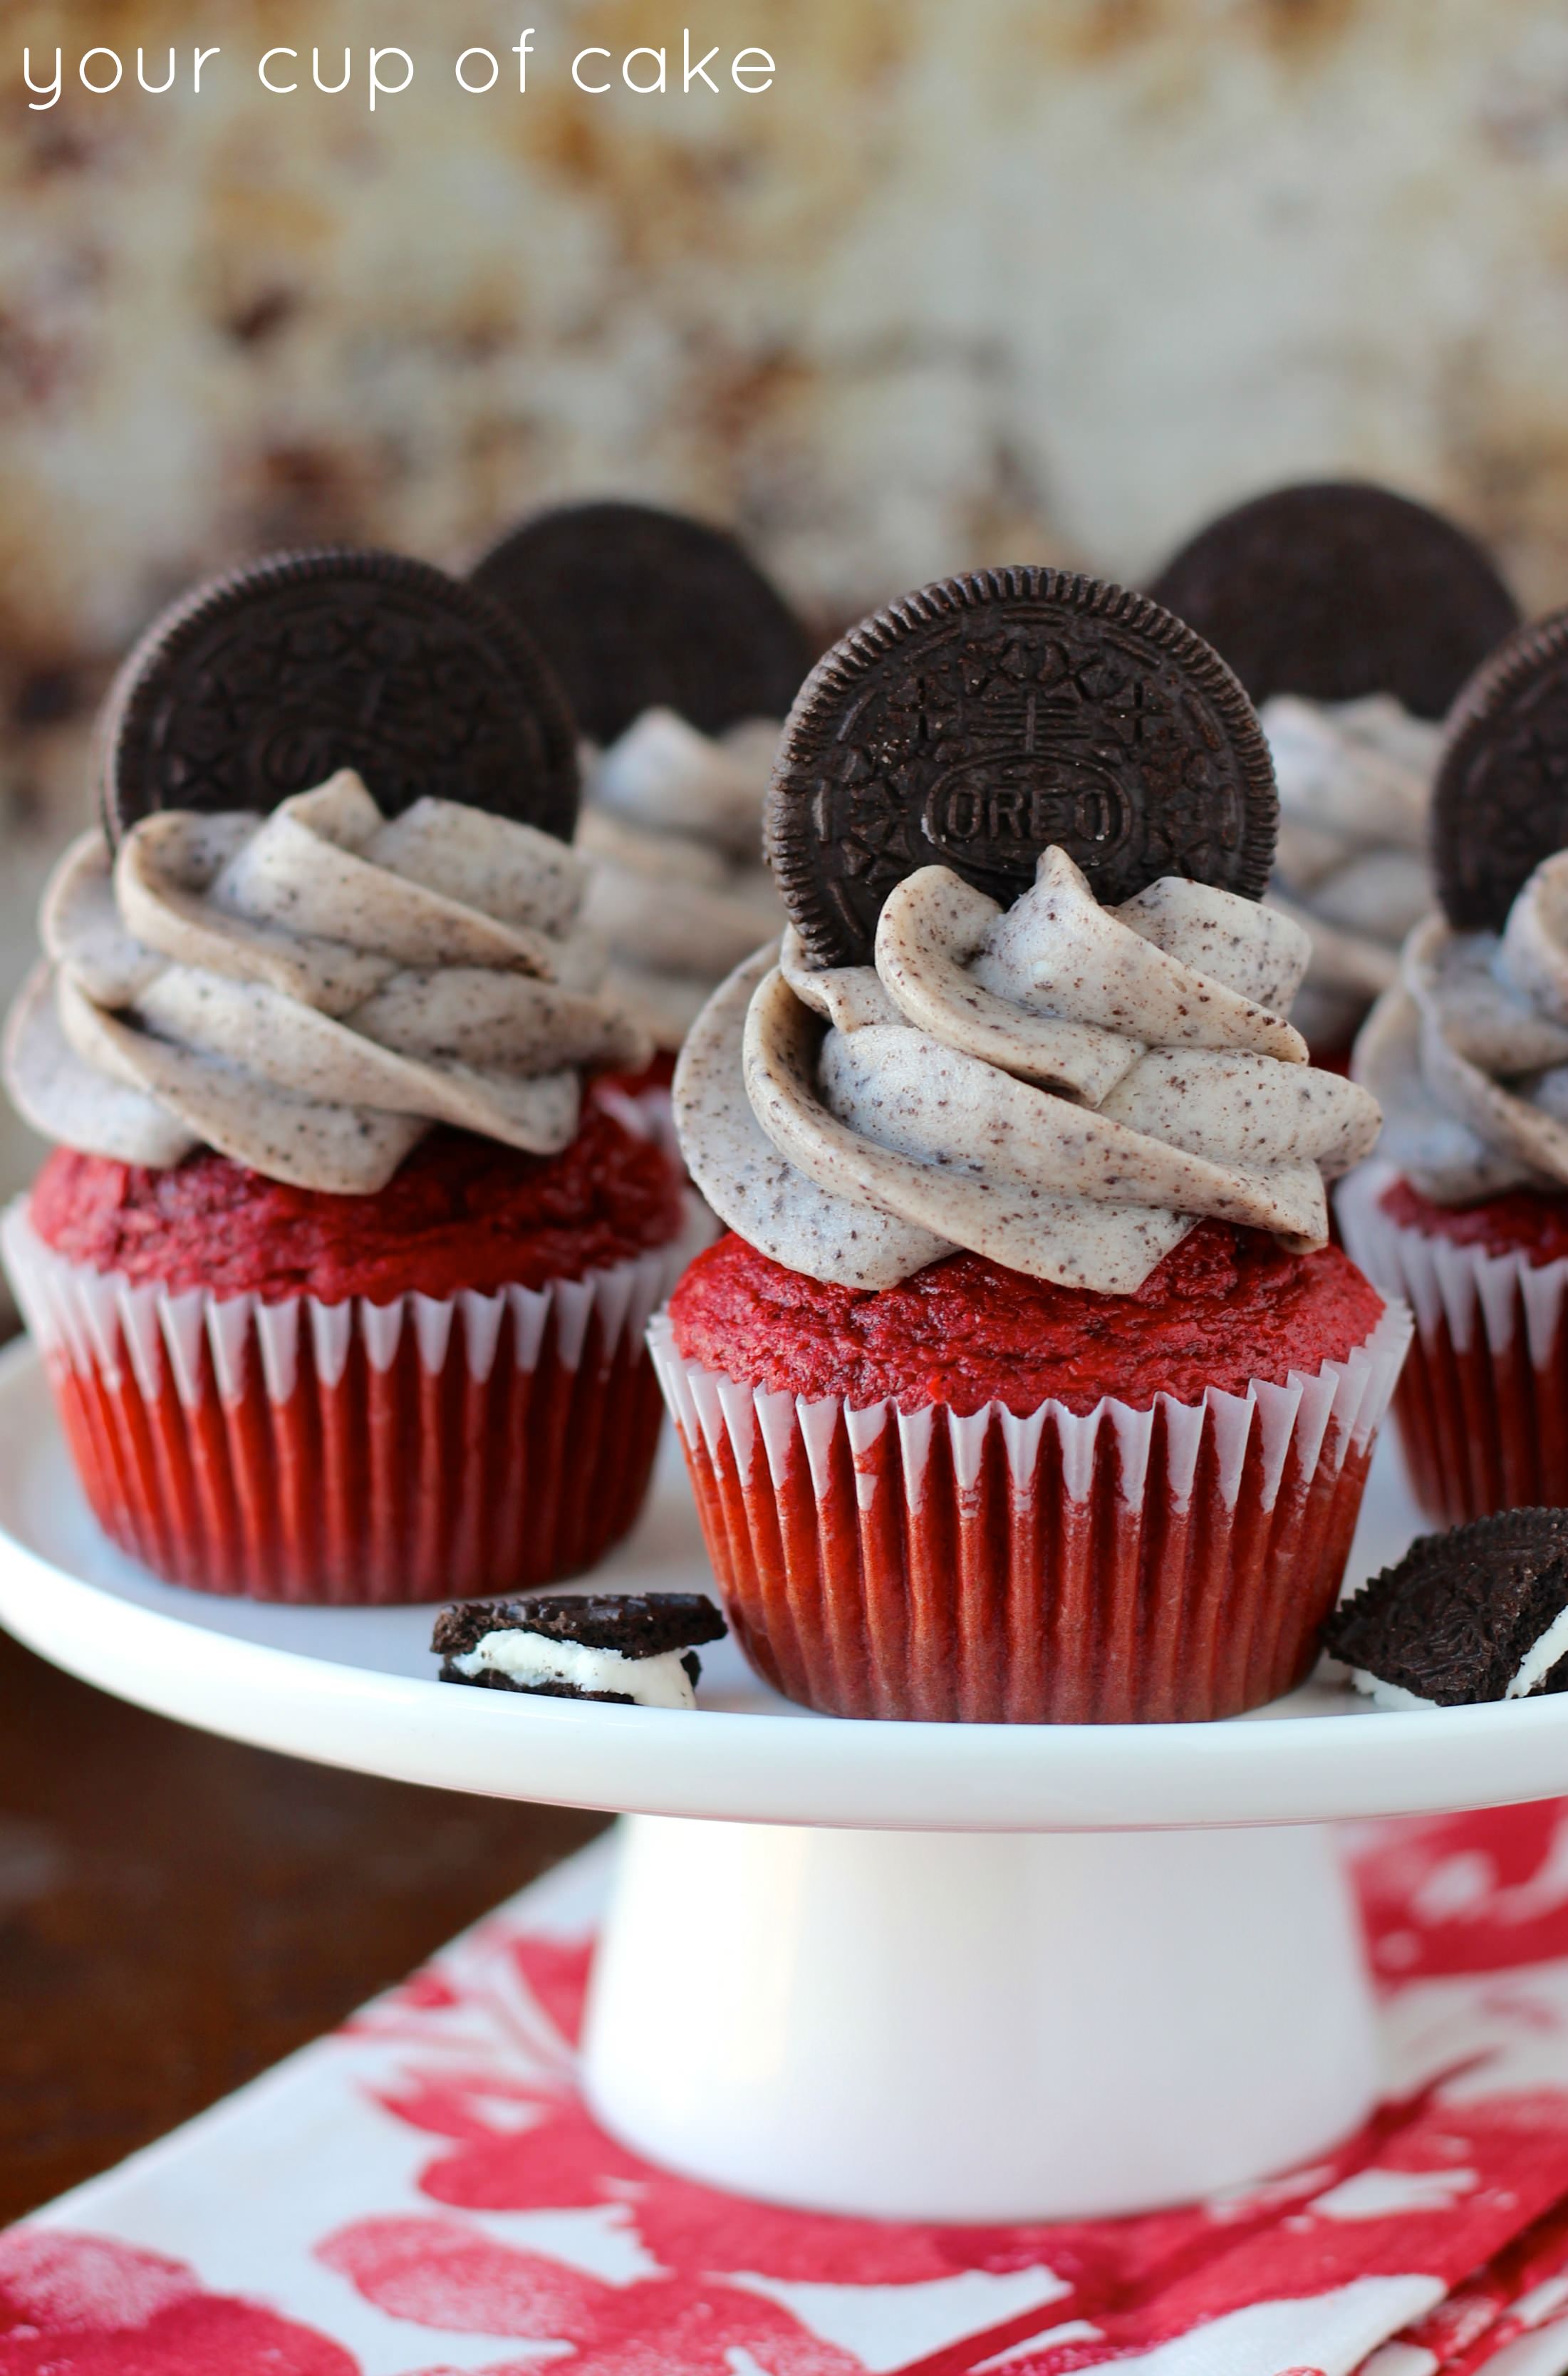 Oreo Red Velvet Cupcakes - Your Cup of Cake